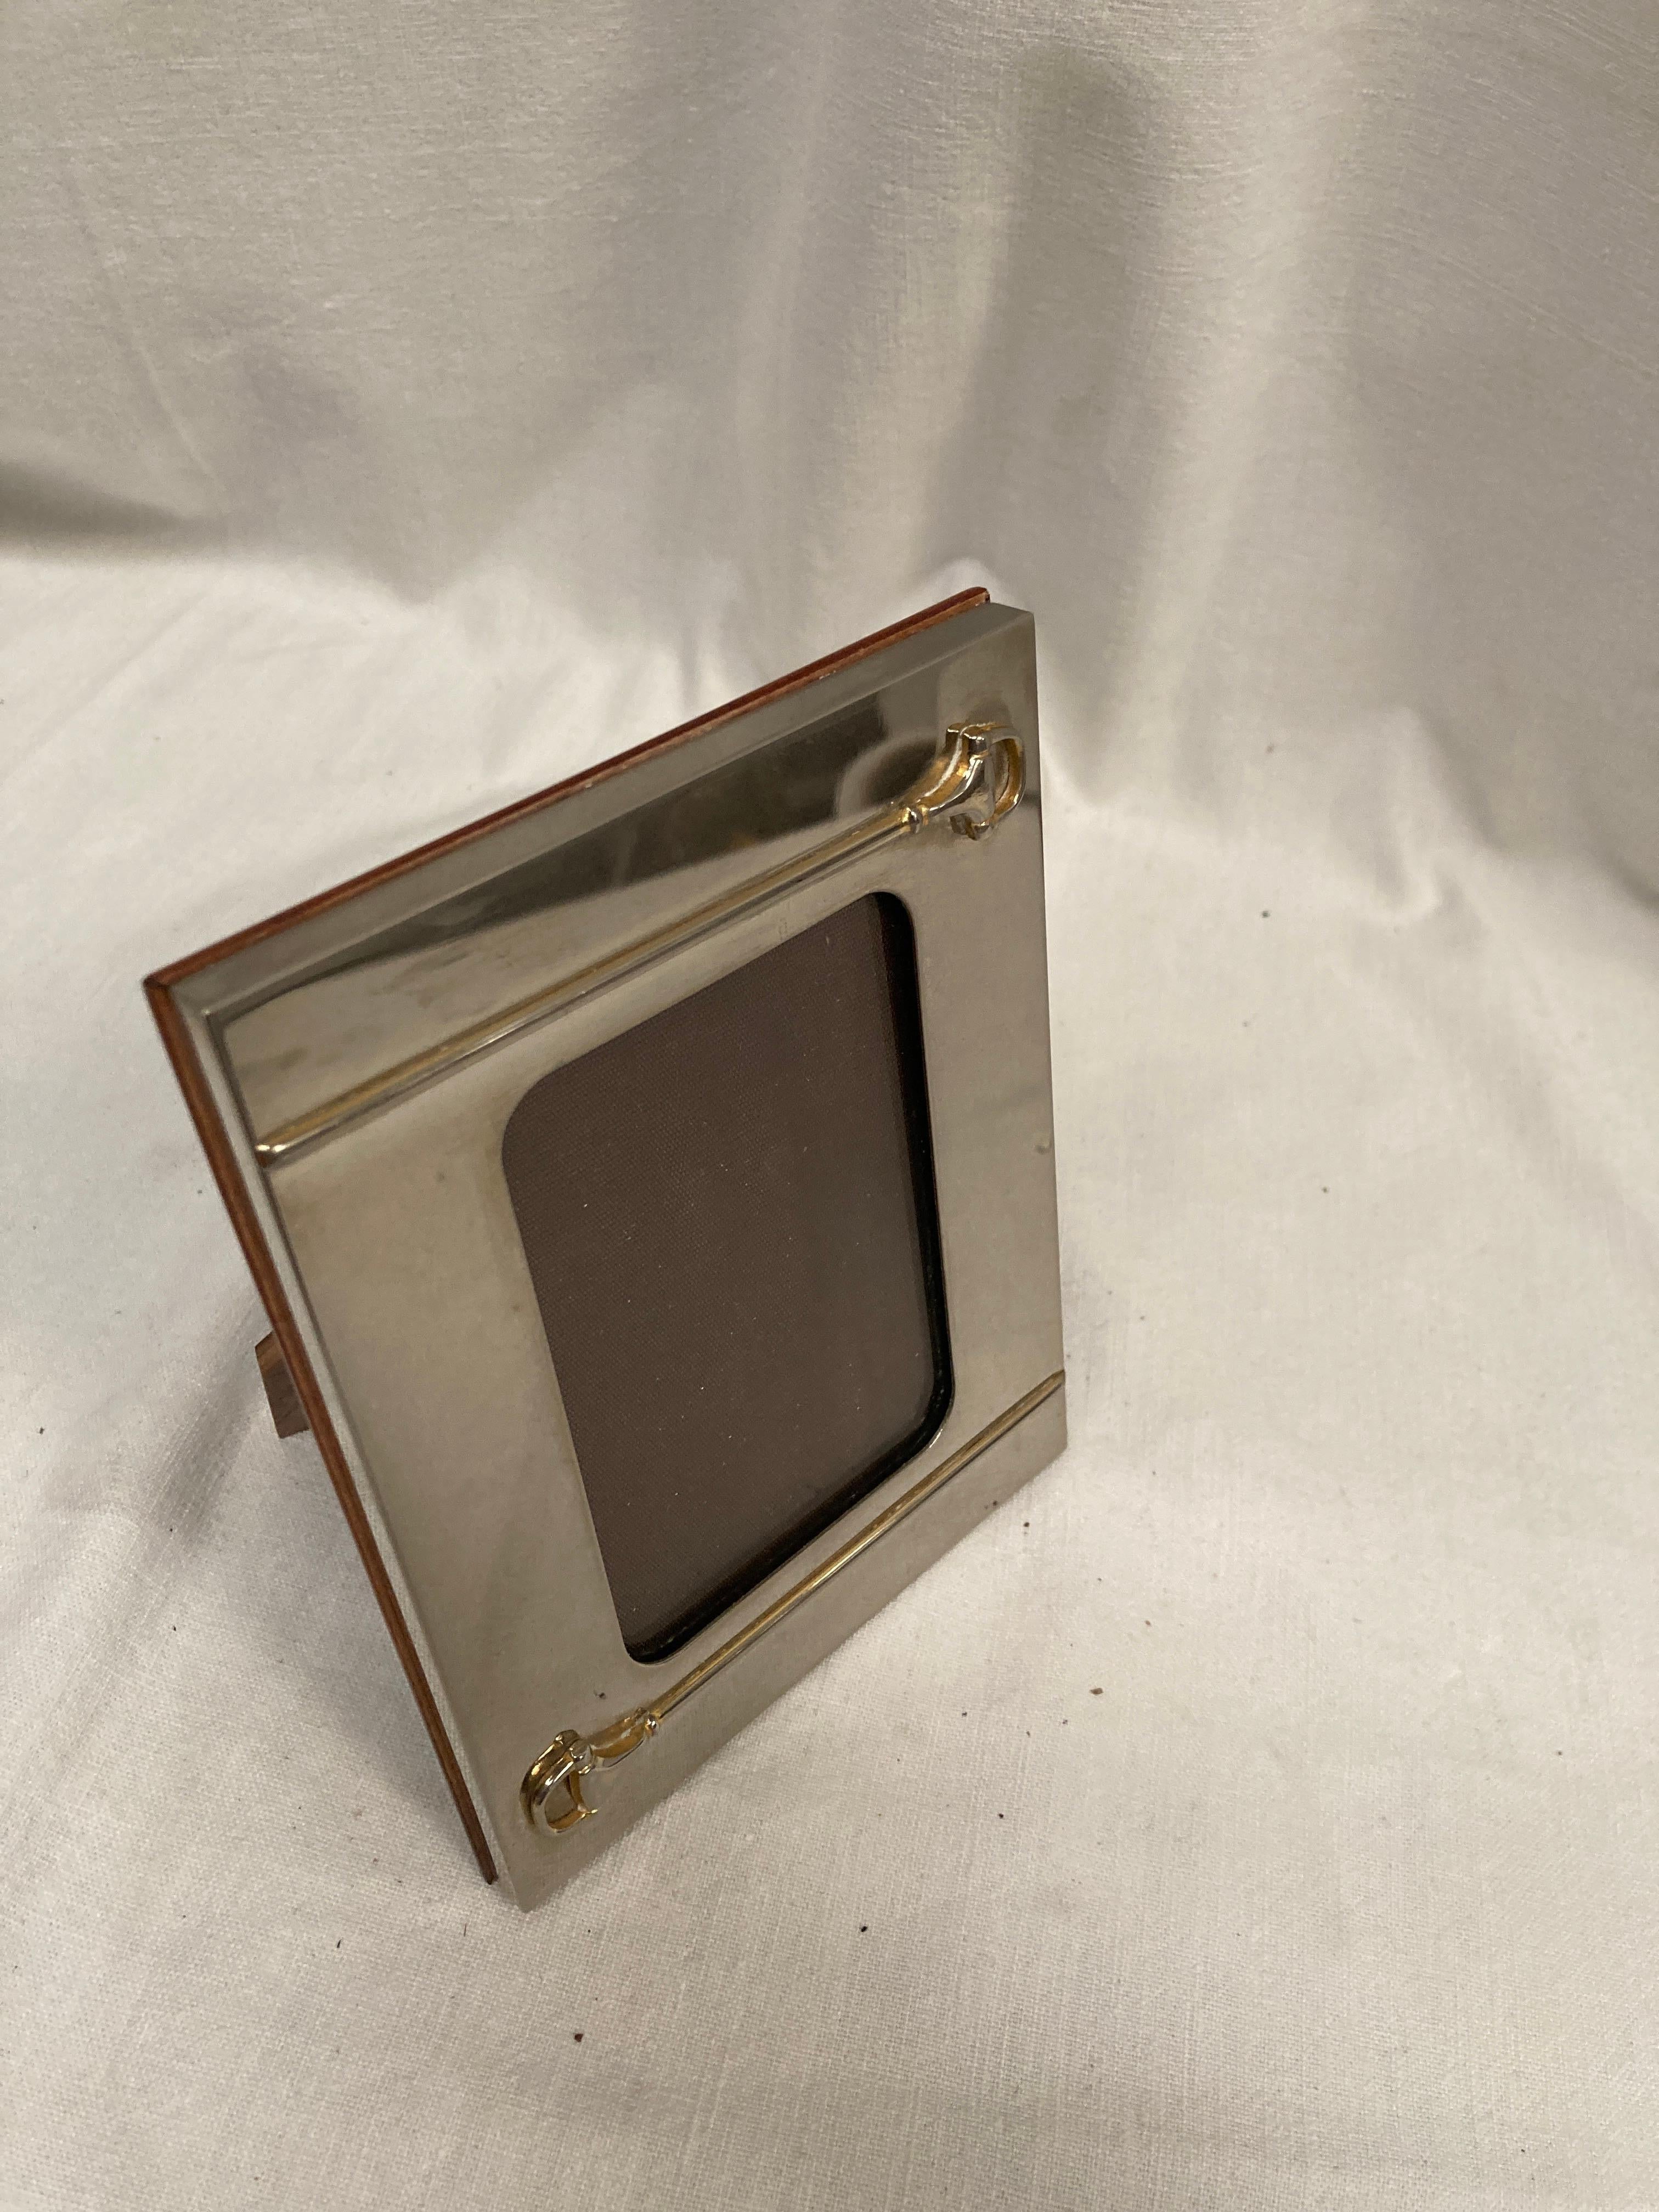 Silver Plate 1970's Gucci picture frame For Sale